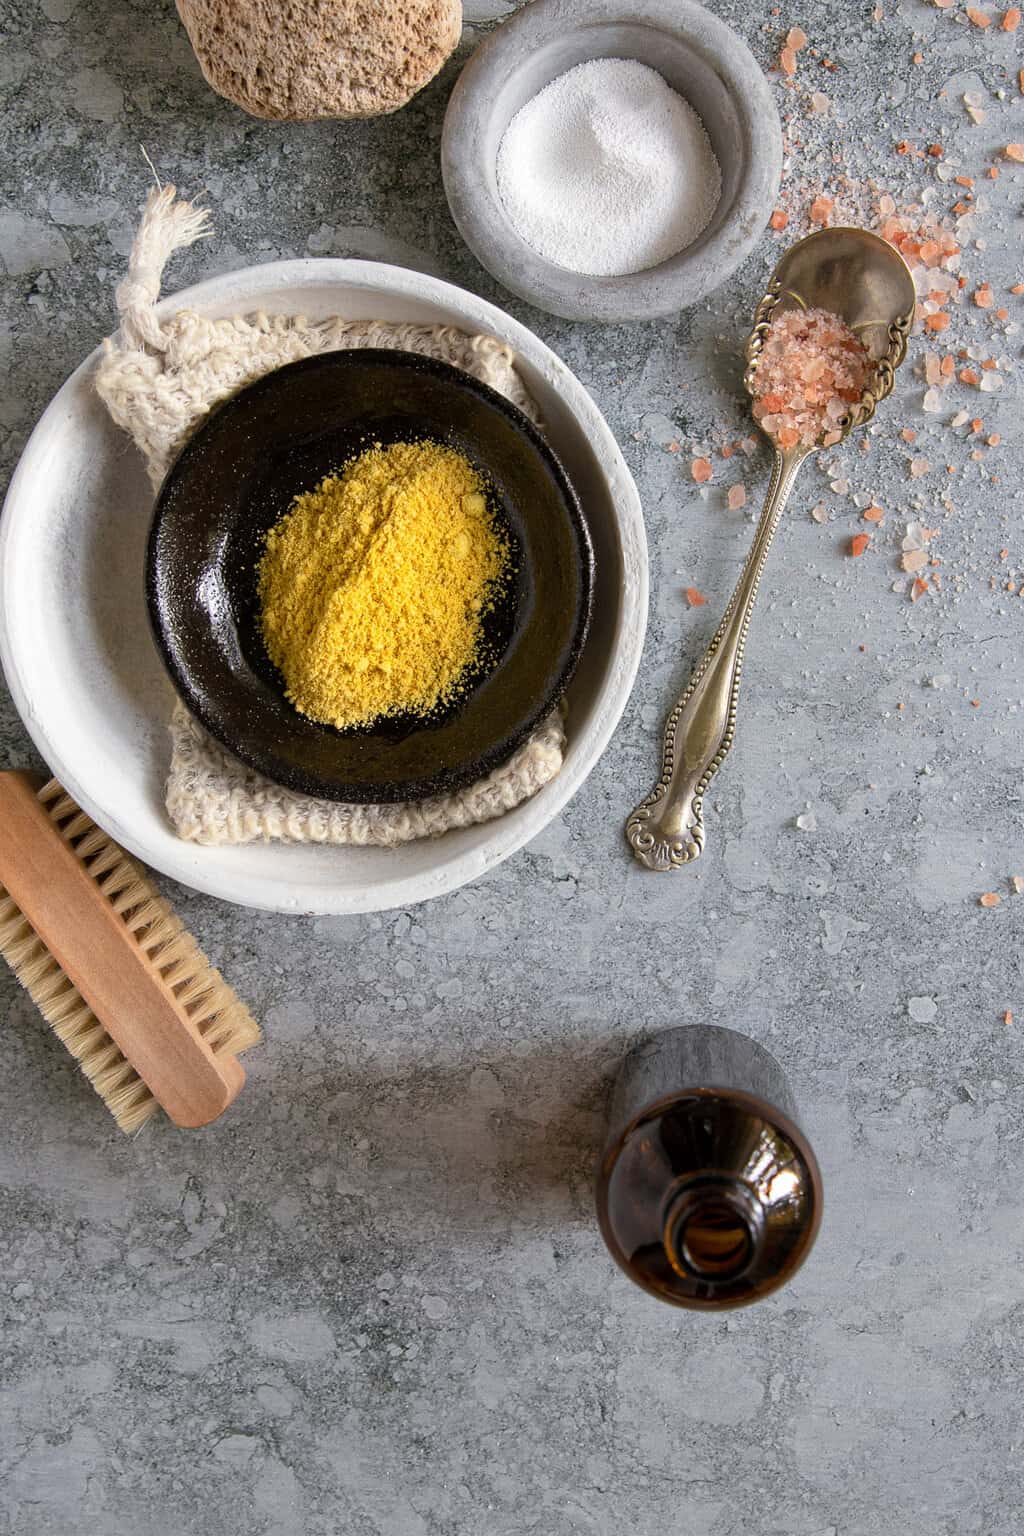 Ingredients needed to make your own mustard bath recipe